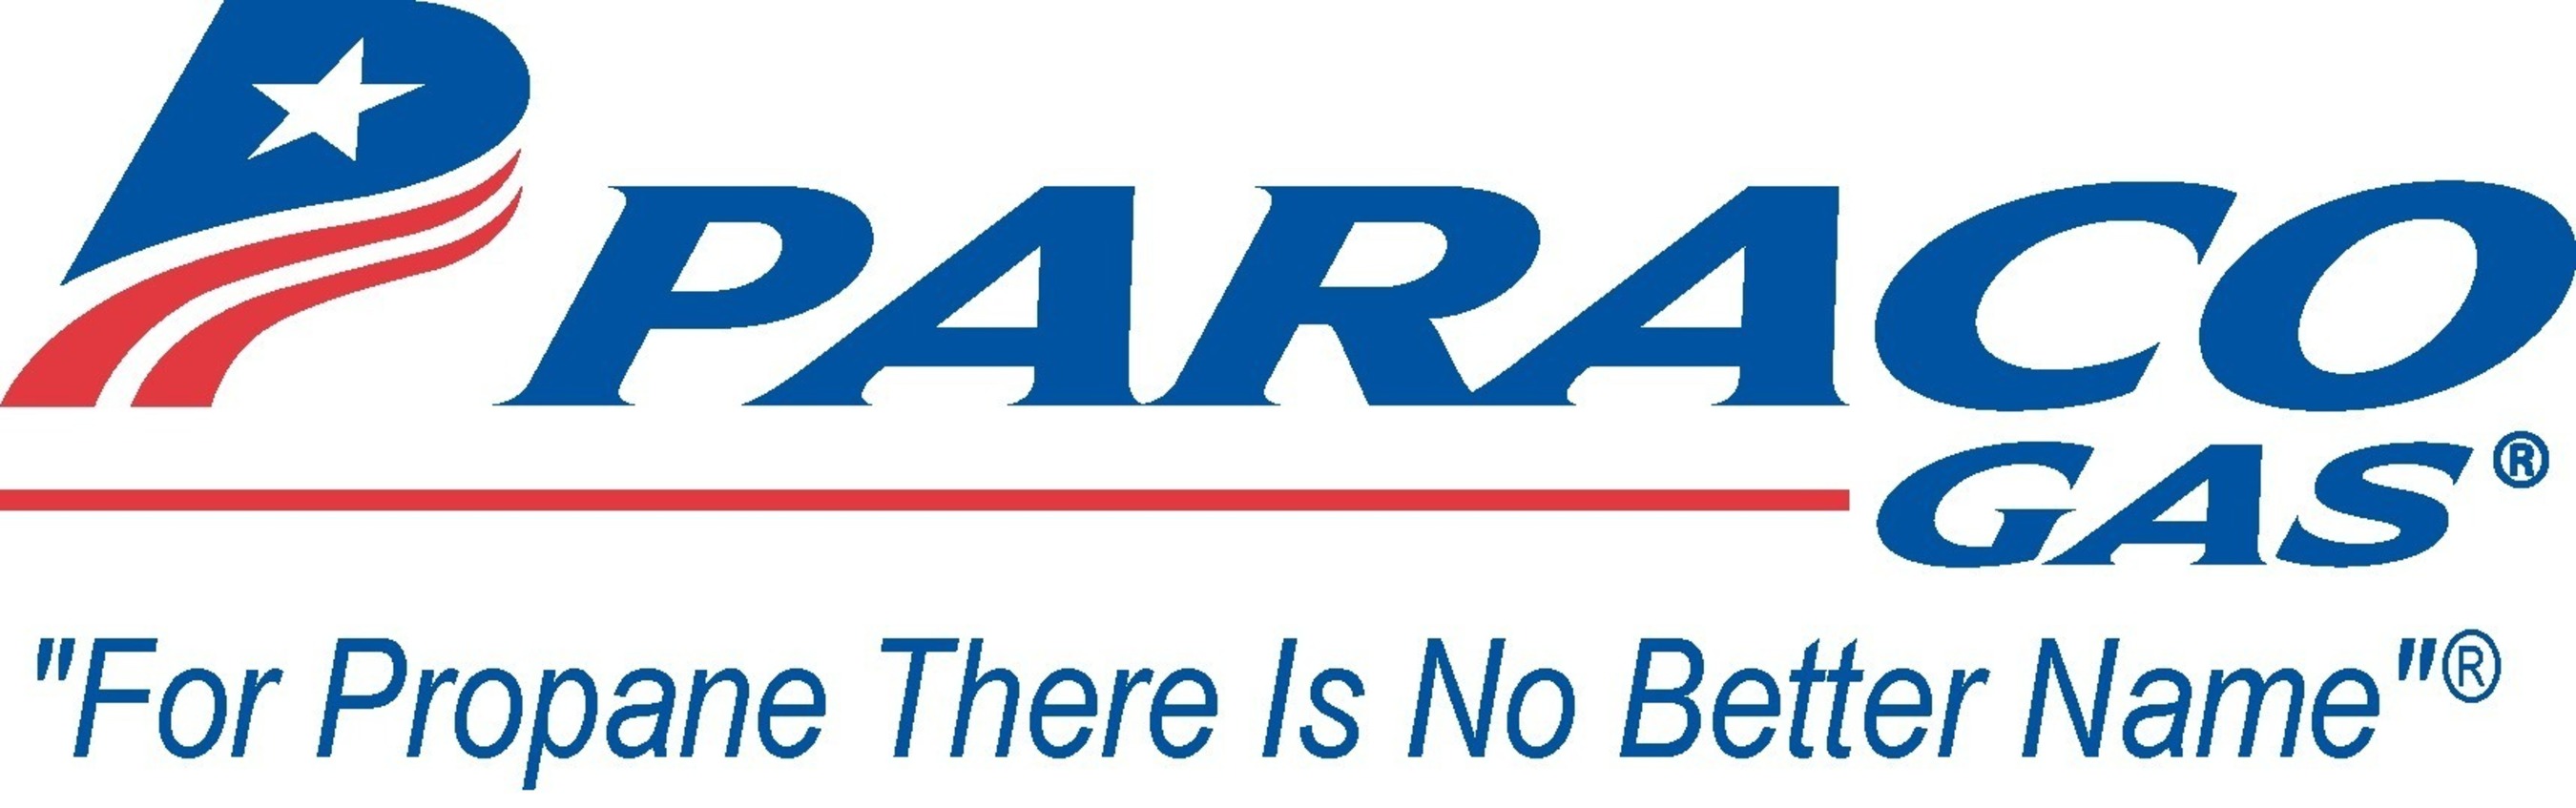 Paraco Gas Corporation is one of the largest privately-held marketers of propane gas in the state of New York and one of the top regional marketers in the Northeast. The company, which ranked 14th in retail gallons nationally (LP Gas Magazine Survey 2014), services residential, commercial and wholesale markets in New York, Pennsylvania, Connecticut, Massachusetts, New Jersey, Vermont, Rhode Island, Georgia, Florida, Illinois, Colorado and North Carolina.  (PRNewsFoto/Paraco Gas Corporation)